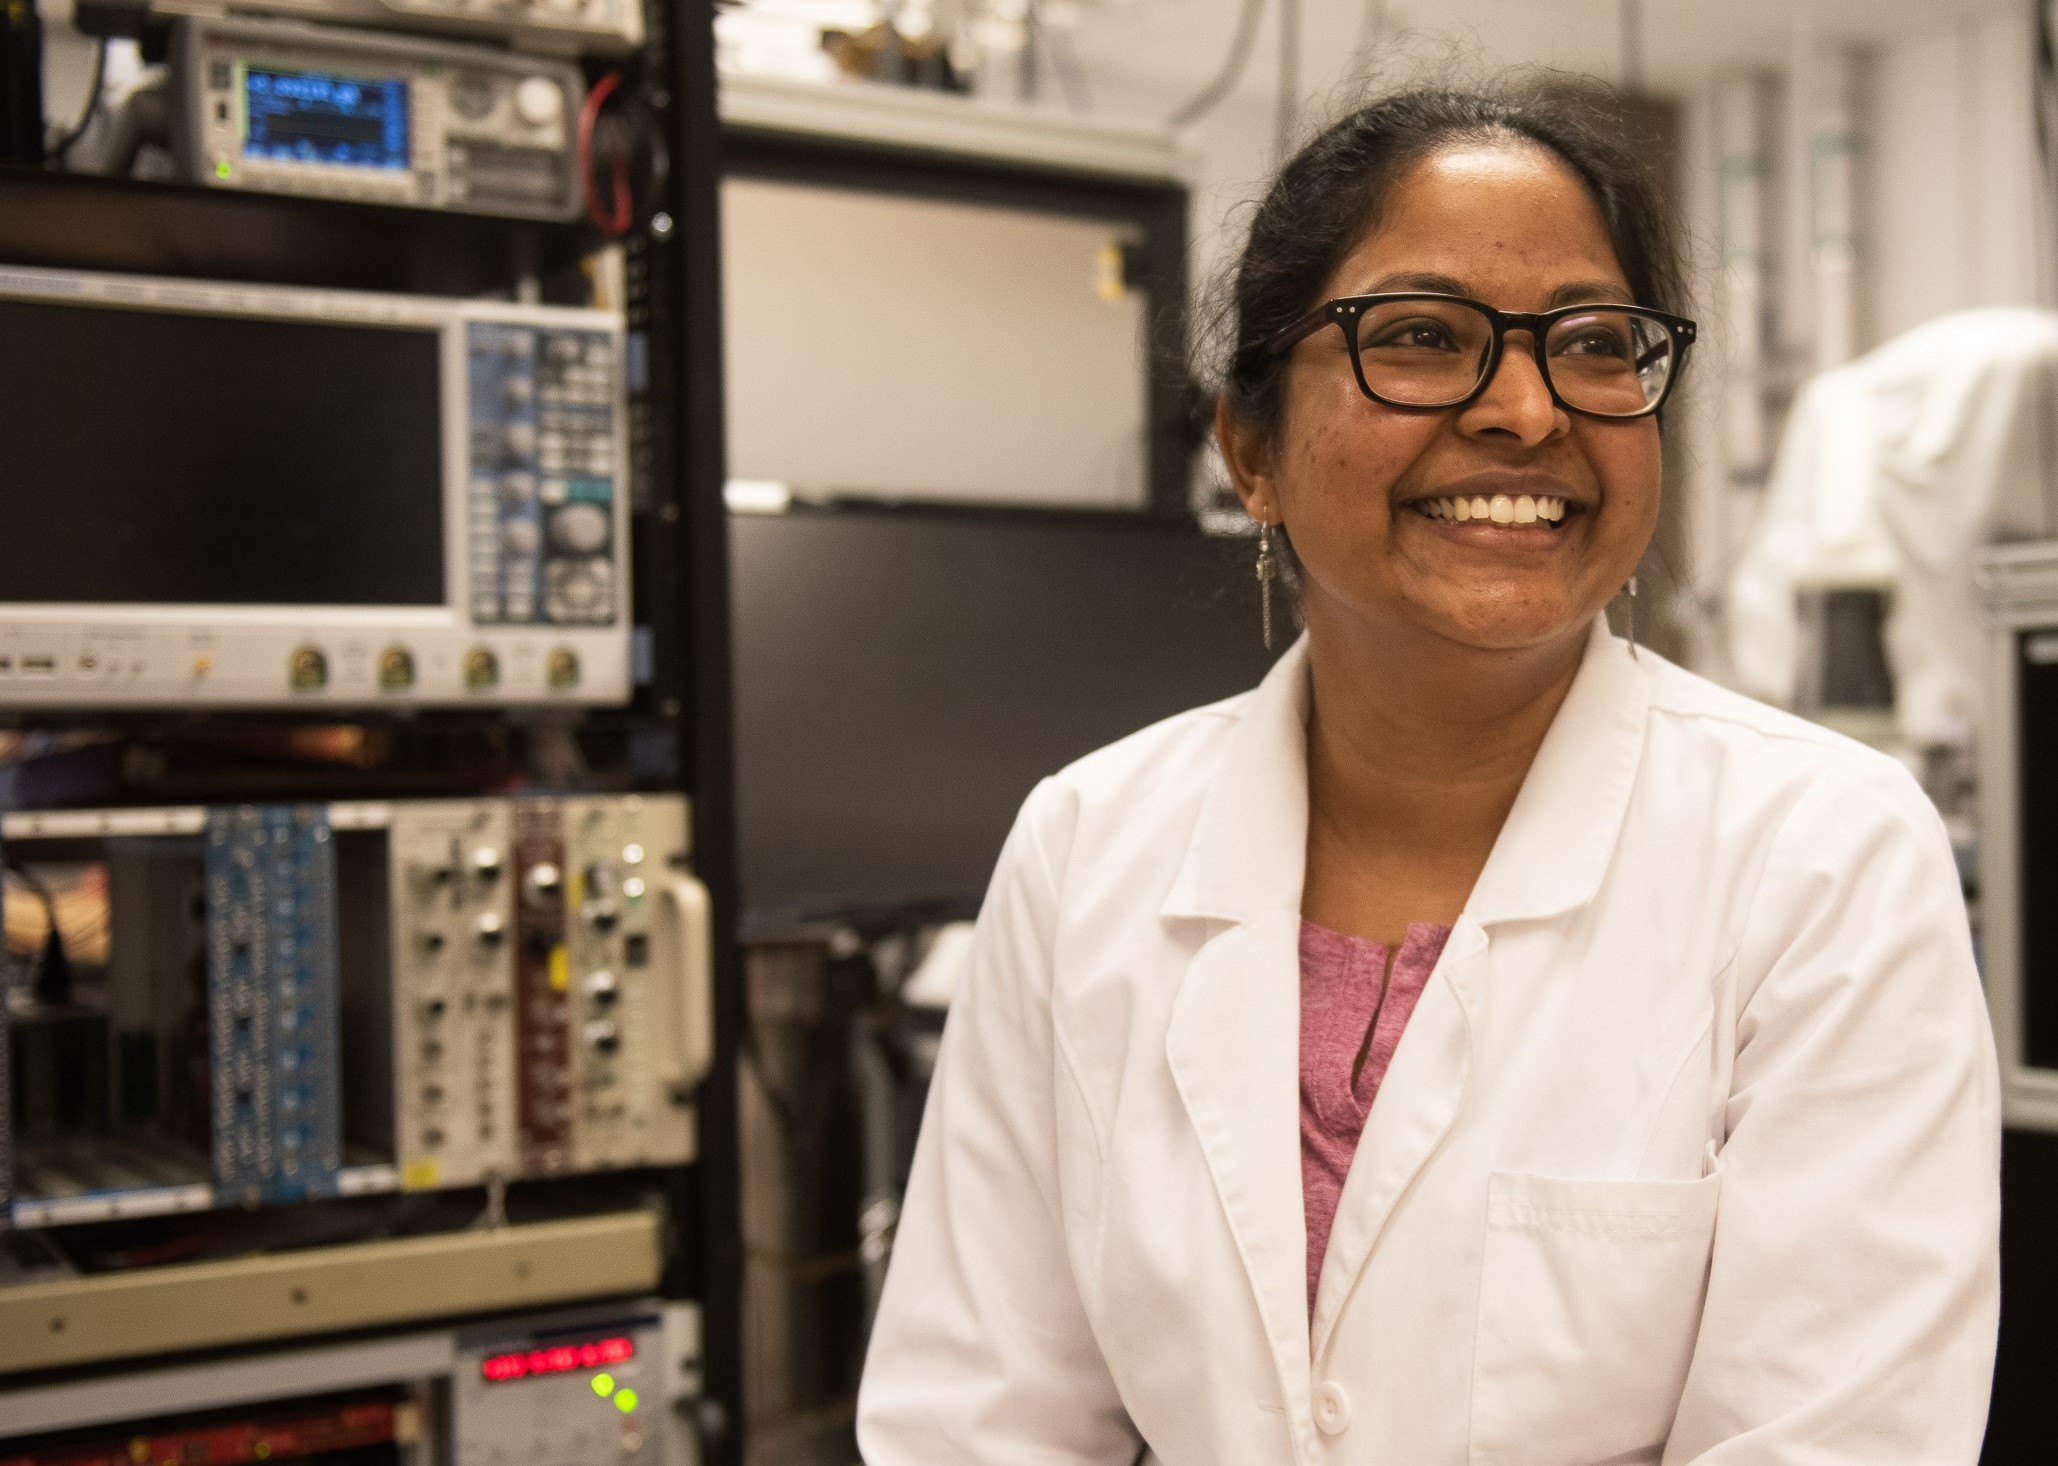 Bernadette Rebeiro smiling at something behind the camera in the Brunner lab.